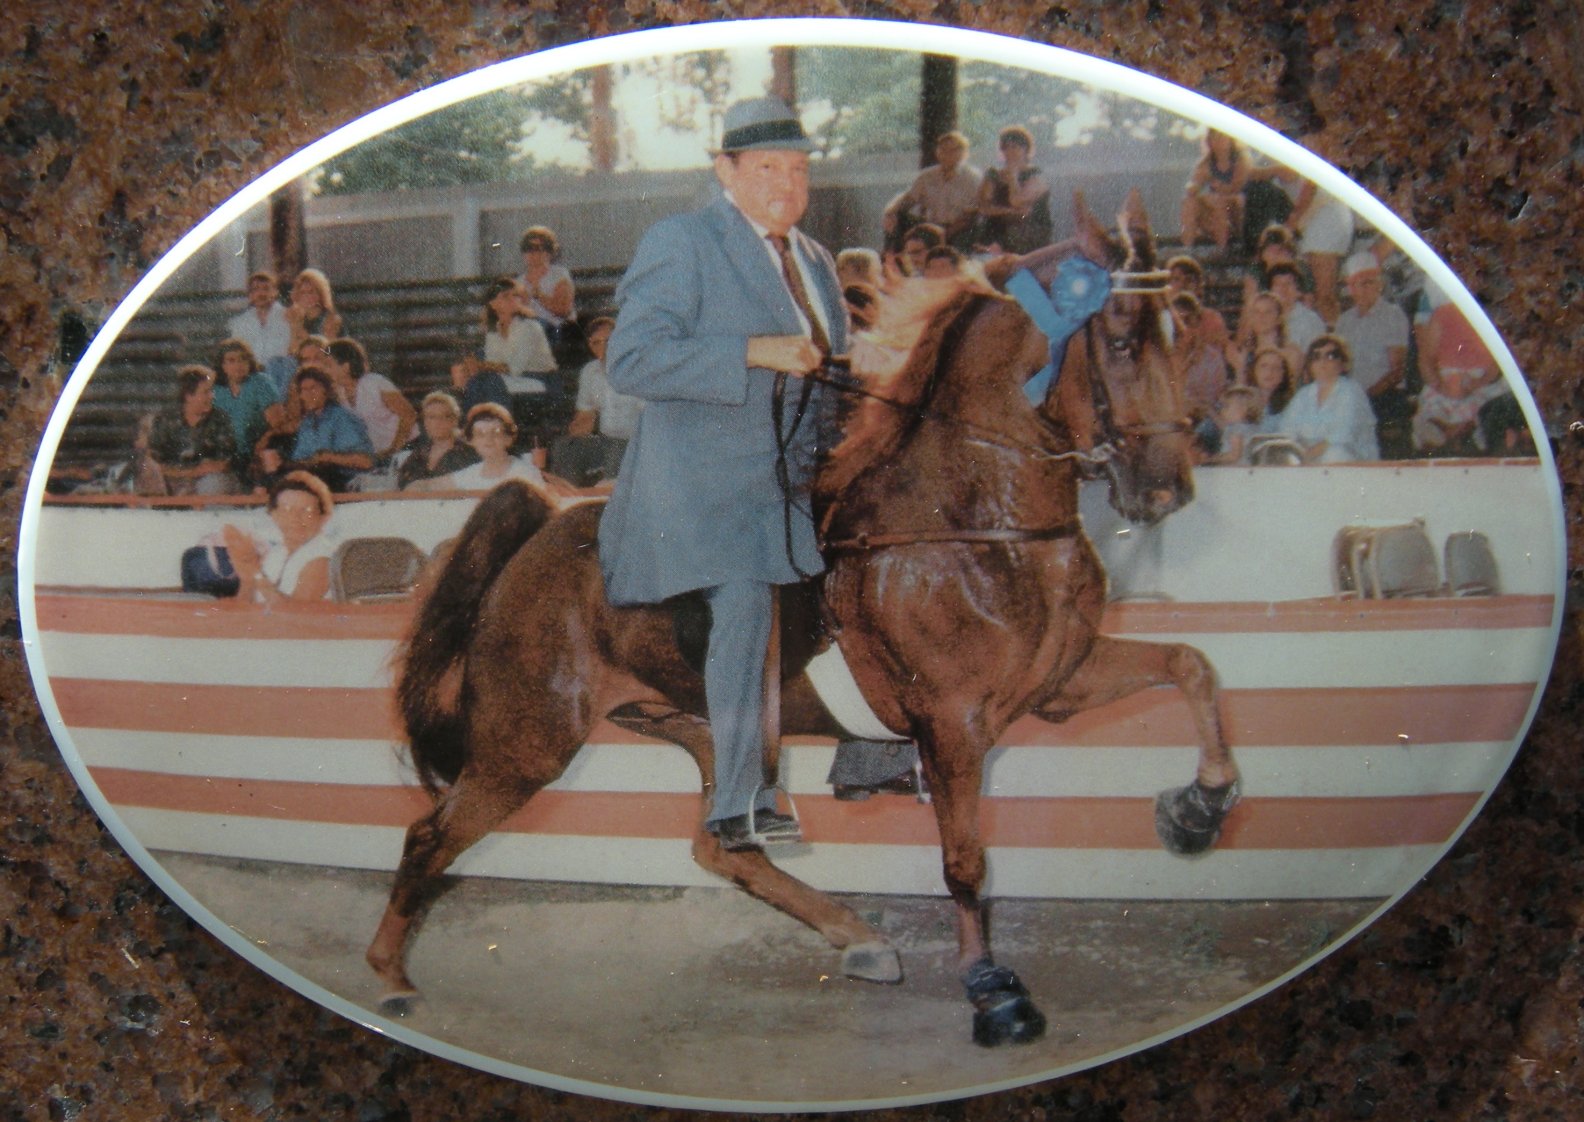 Tom Nickell on his horse at a show